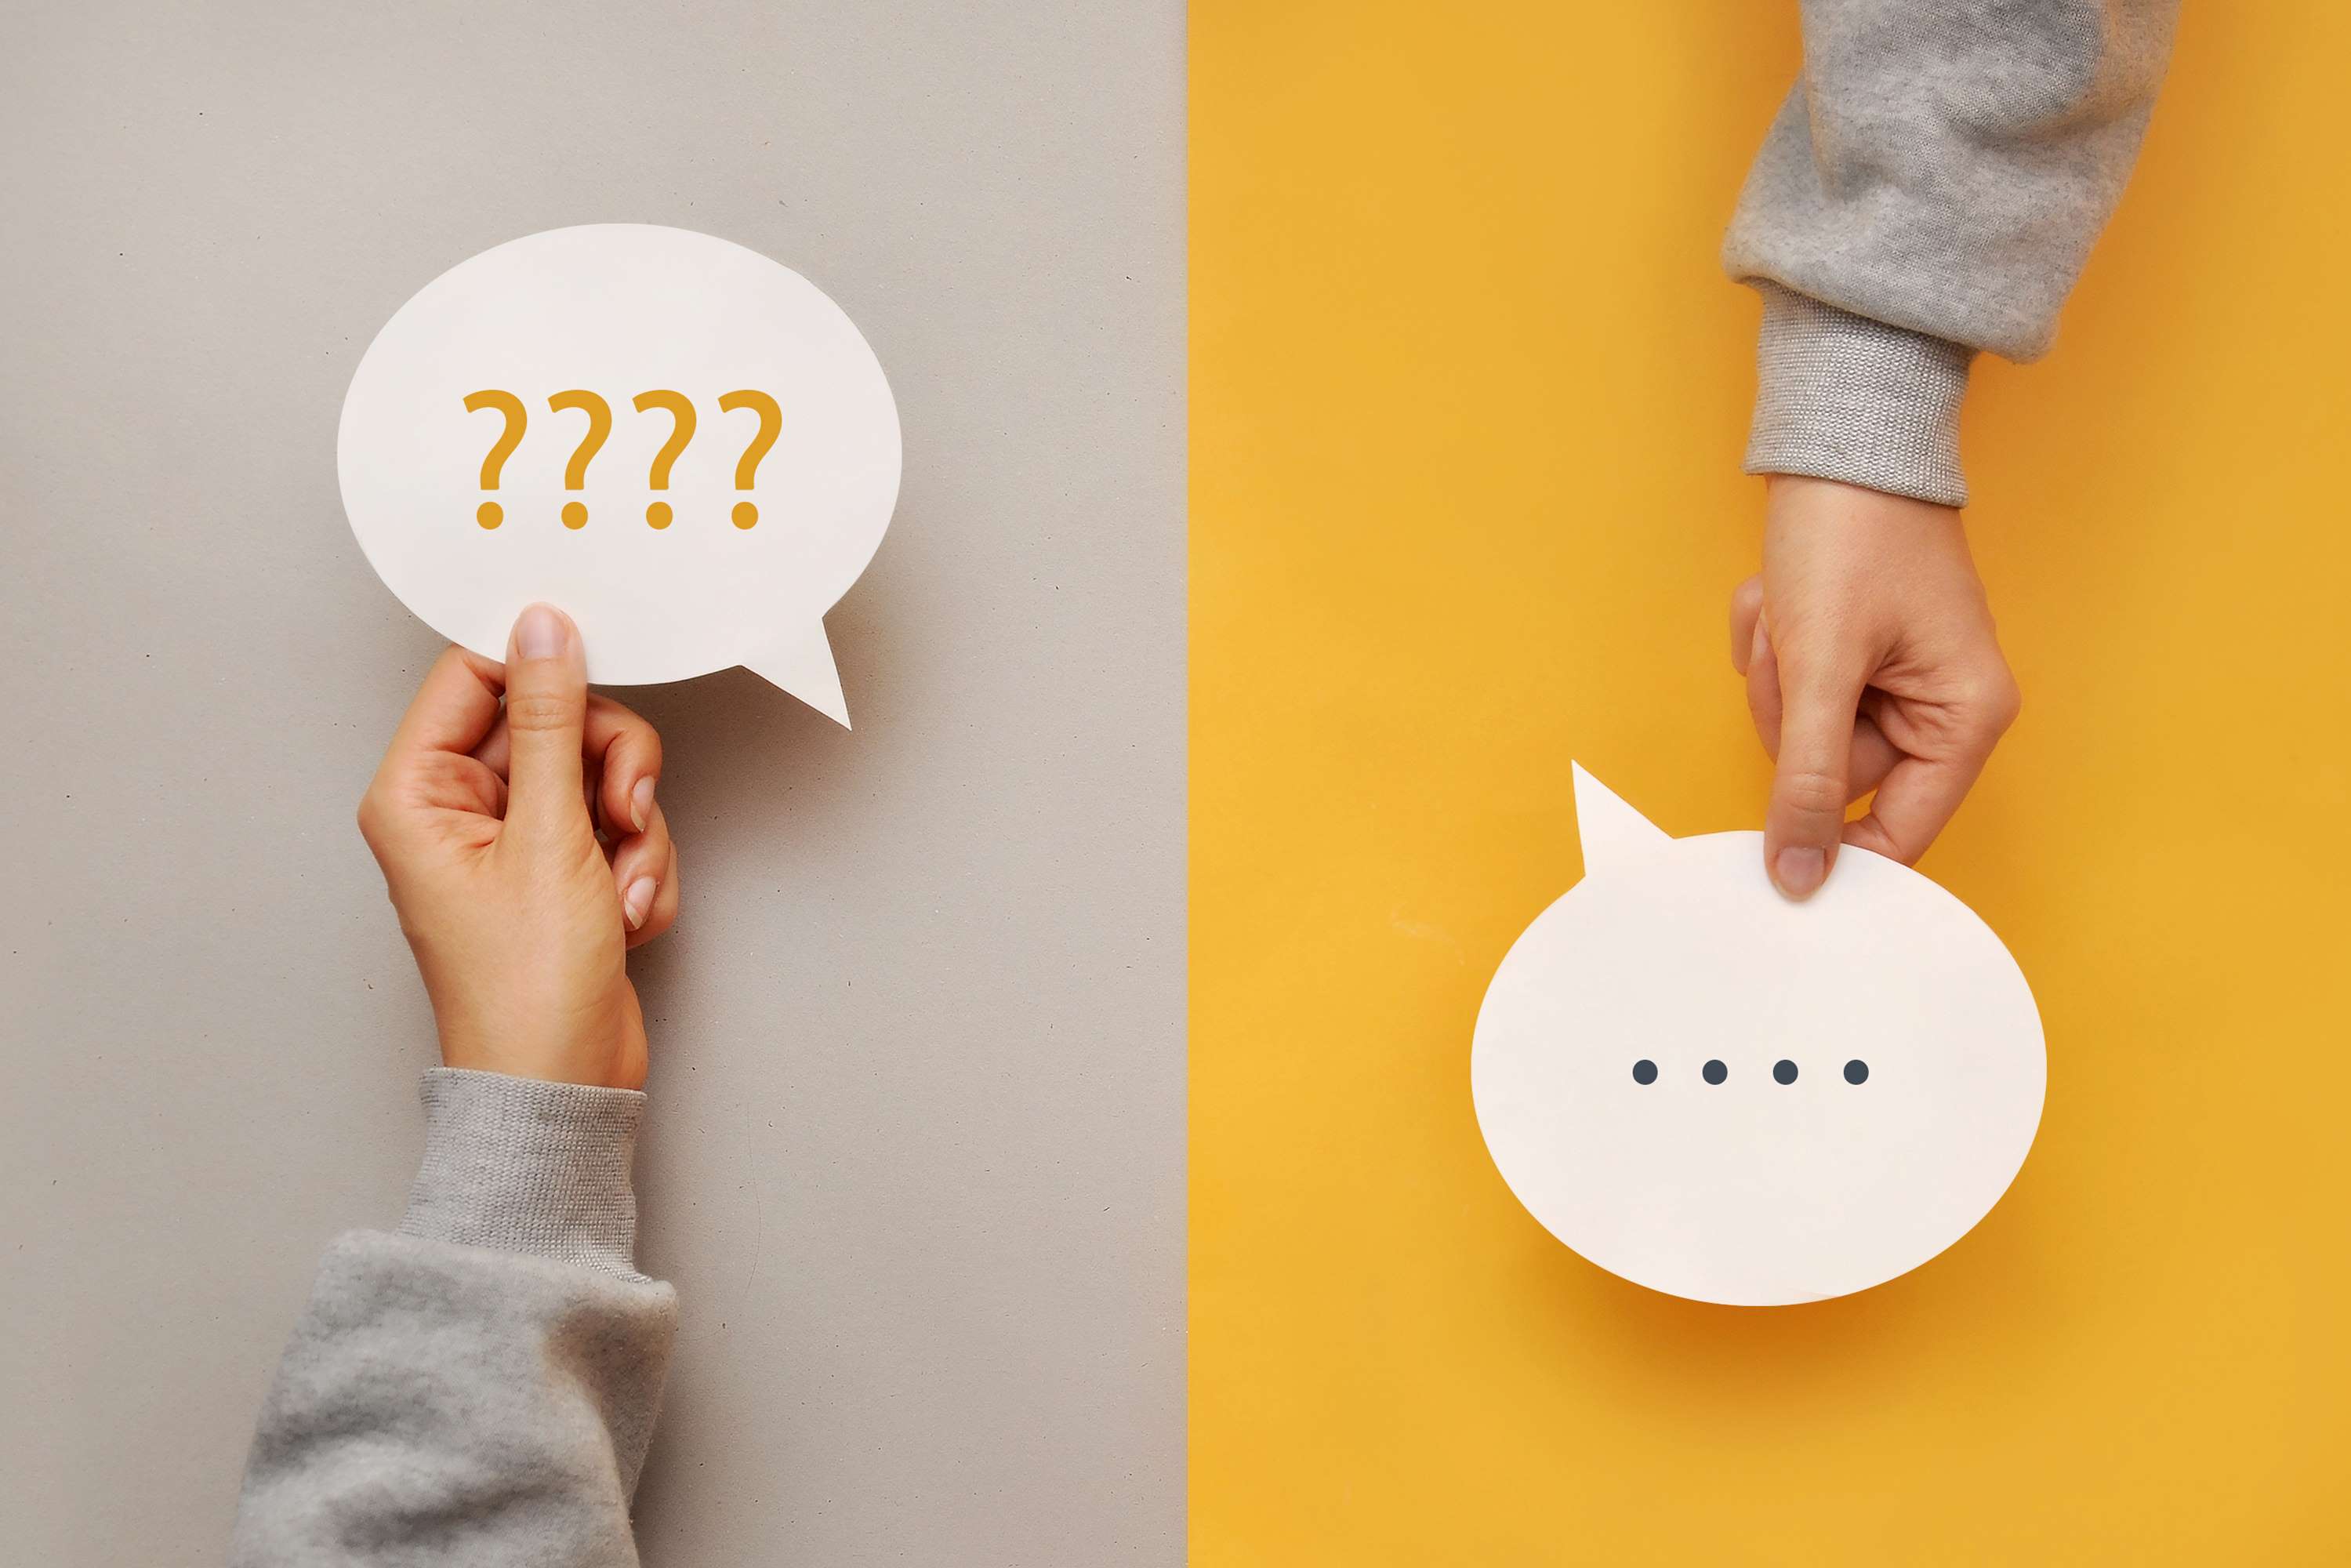 Person holding a question mark and another person holding a speech bubble in answer